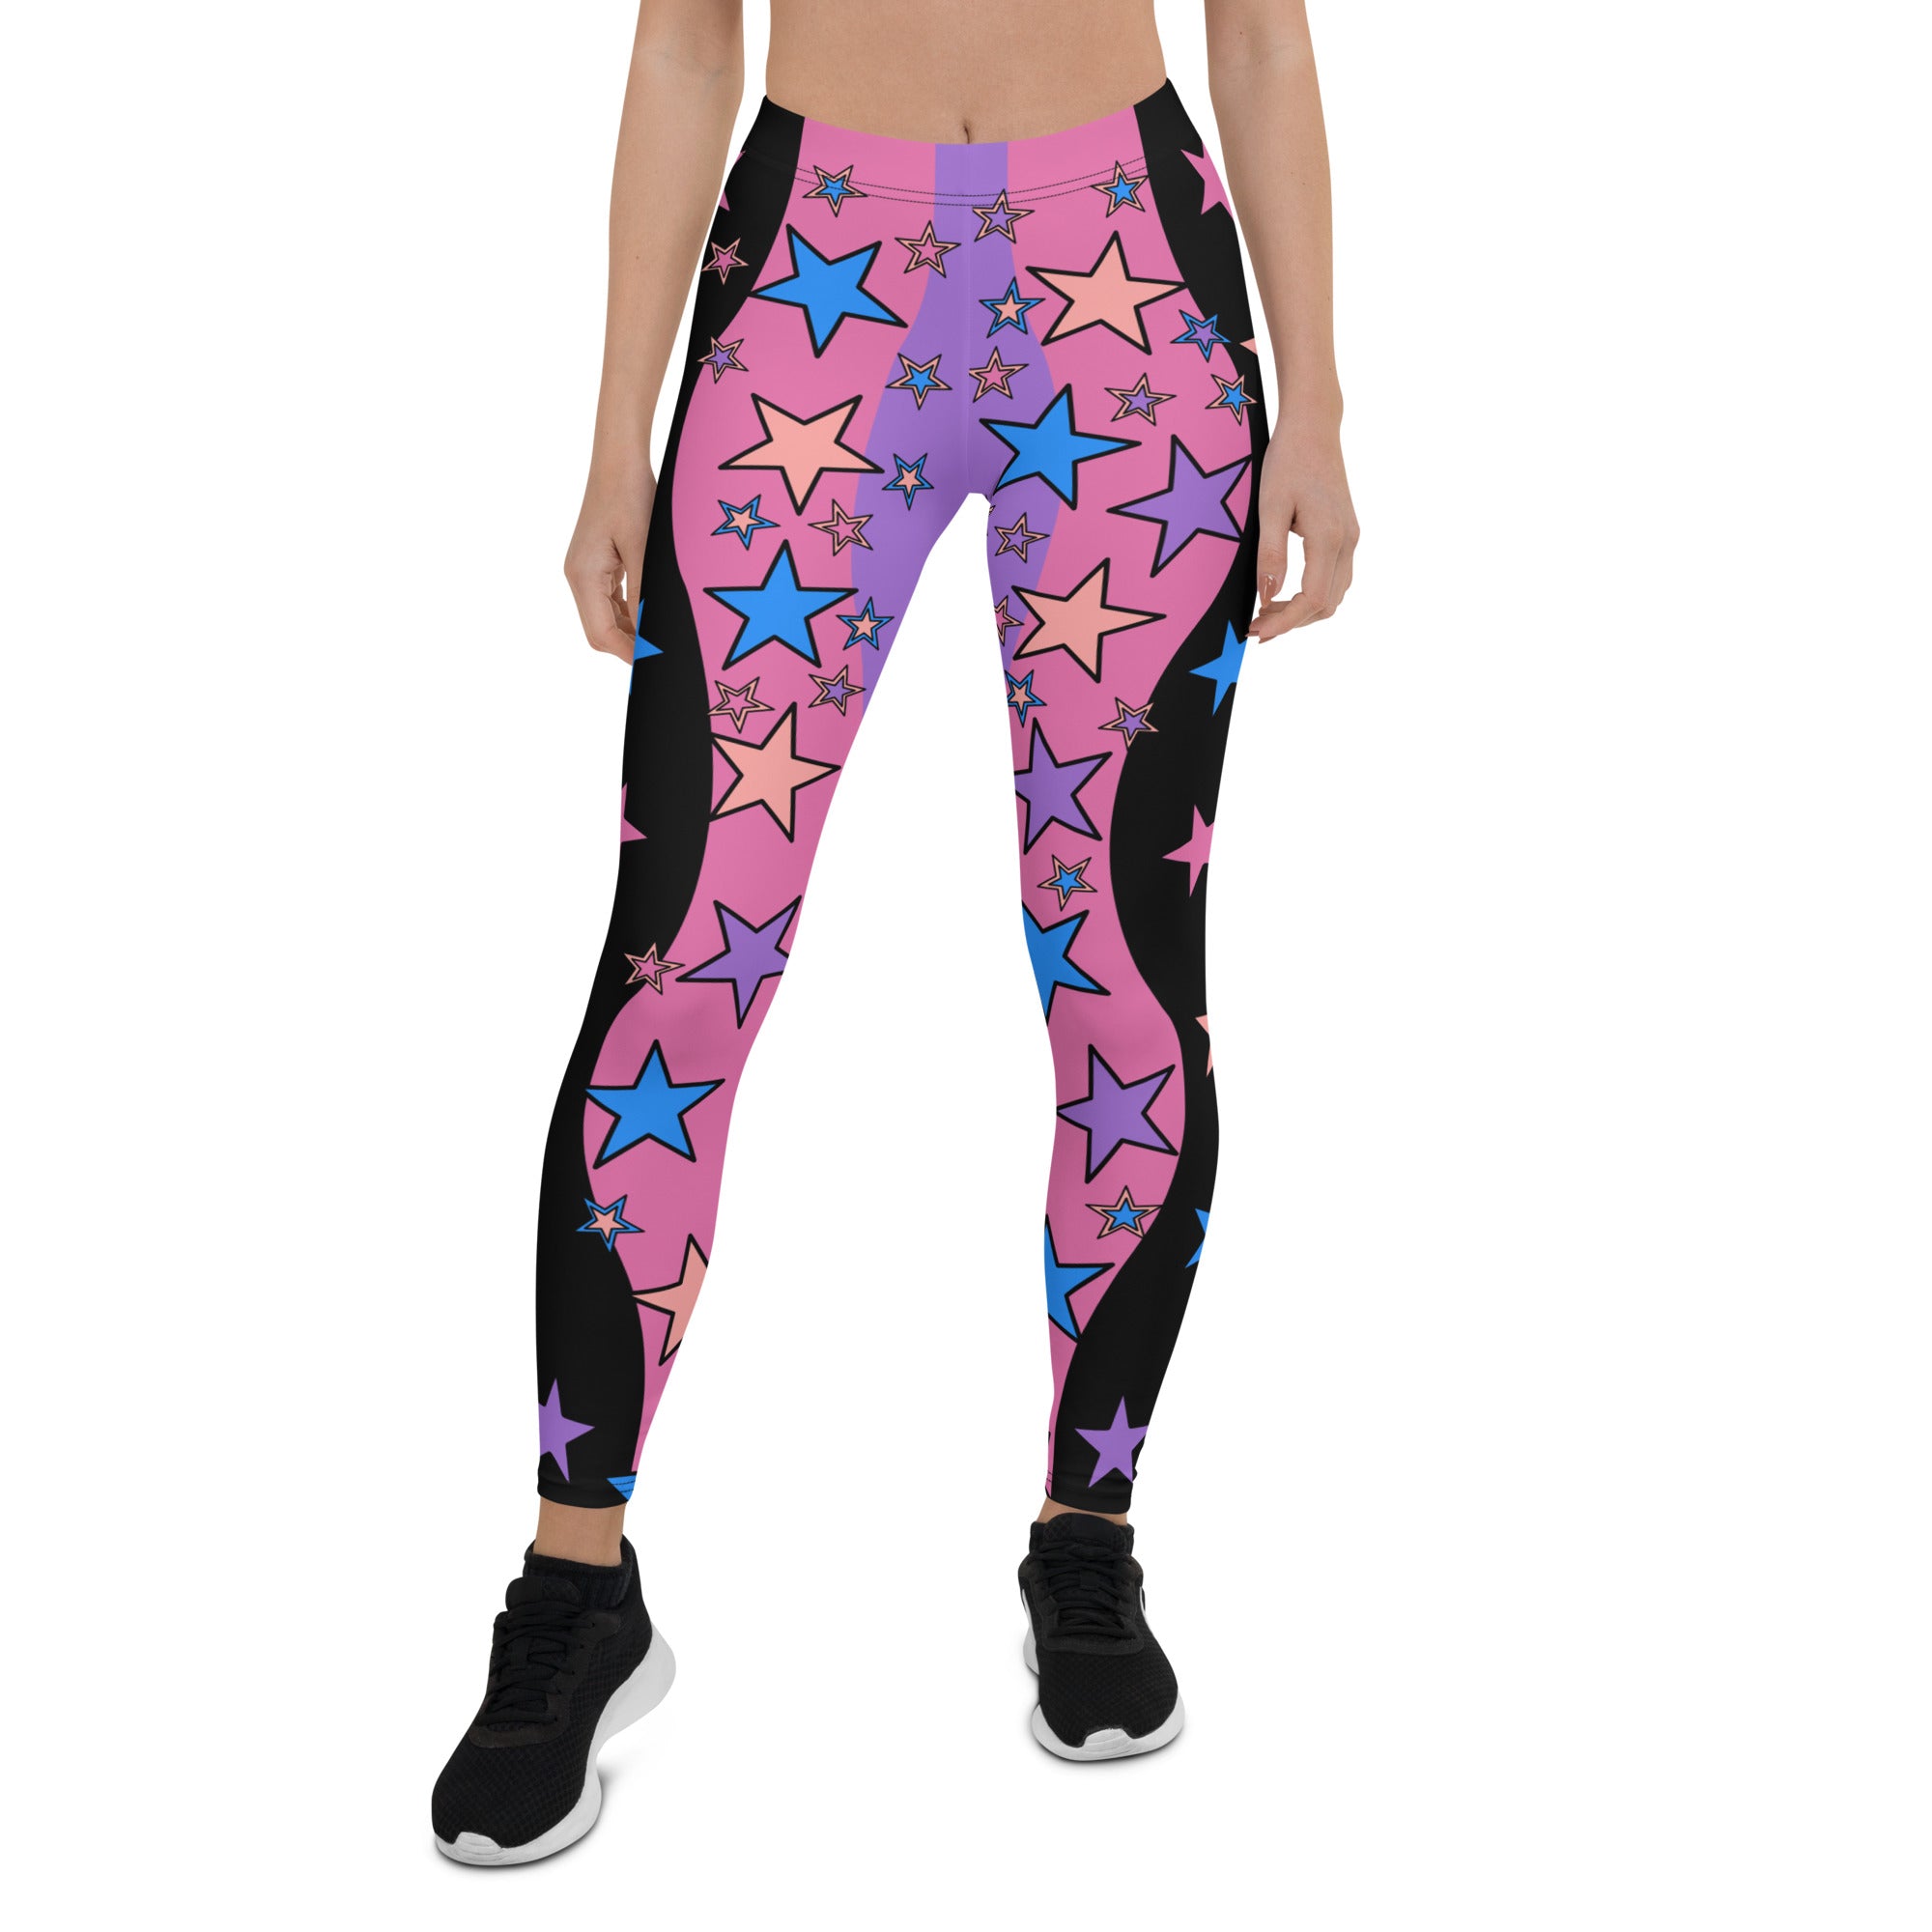 Buy Br Fashion Touch Stretchable Printed Leggings for Womens 3 Colors  Available (Free Size) at Amazon.in